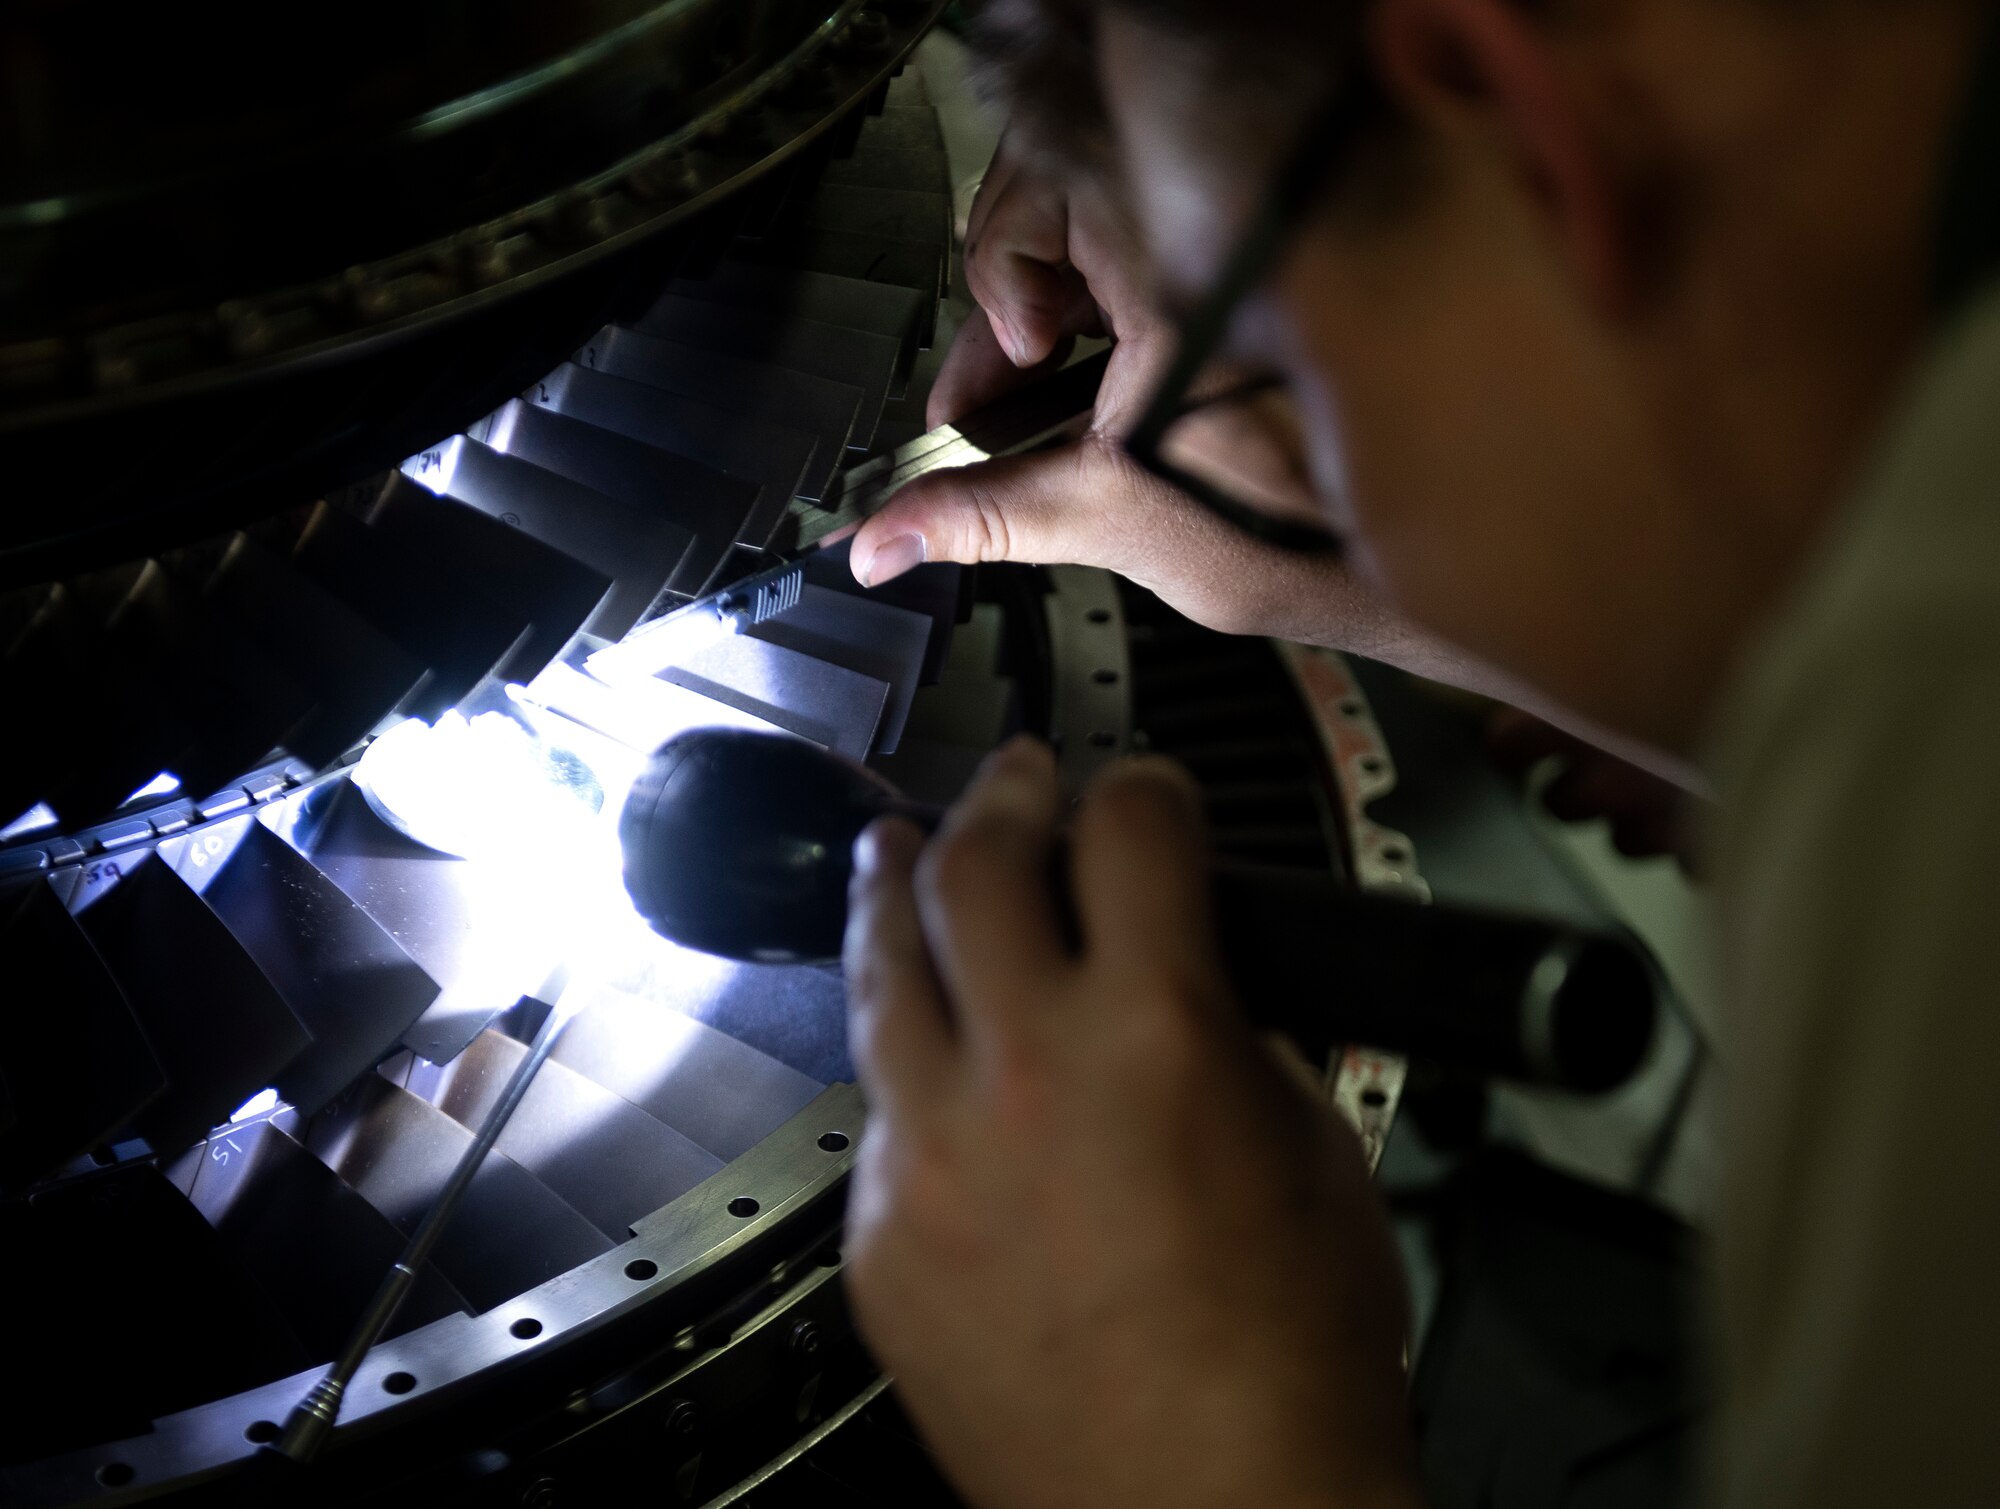 A propulsion flight Airman assigned to the 48th Component Maintenance Squadron inspects engine blades at Royal Air Force Lakenheath, England, April 29, 2020. The propulsion flight contributed to the 48th Maintenance Group earning the 2019 USAFE-AFAFRICA Clements McMullen Memorial Daedalian Weapon System Maintenance Trophy for a third consecutive year. (U.S. Air Force photo by Airman 1st Class Madeline Herzog)